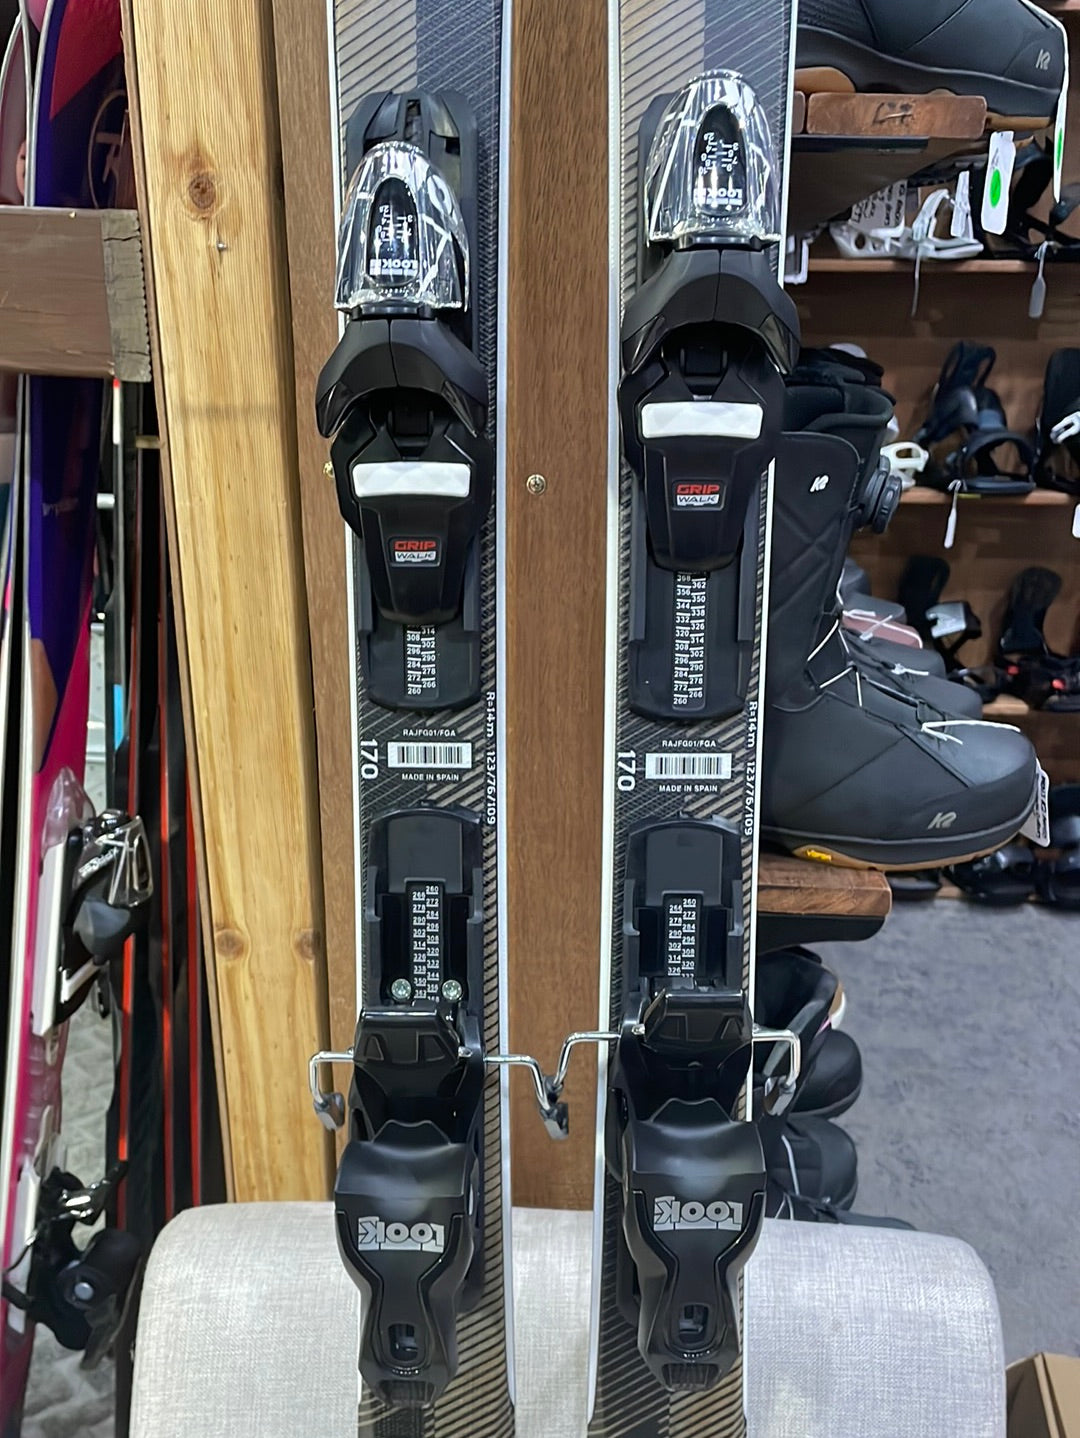 Skis Rossignol All Mountain Skis Experience 76CI Bindings